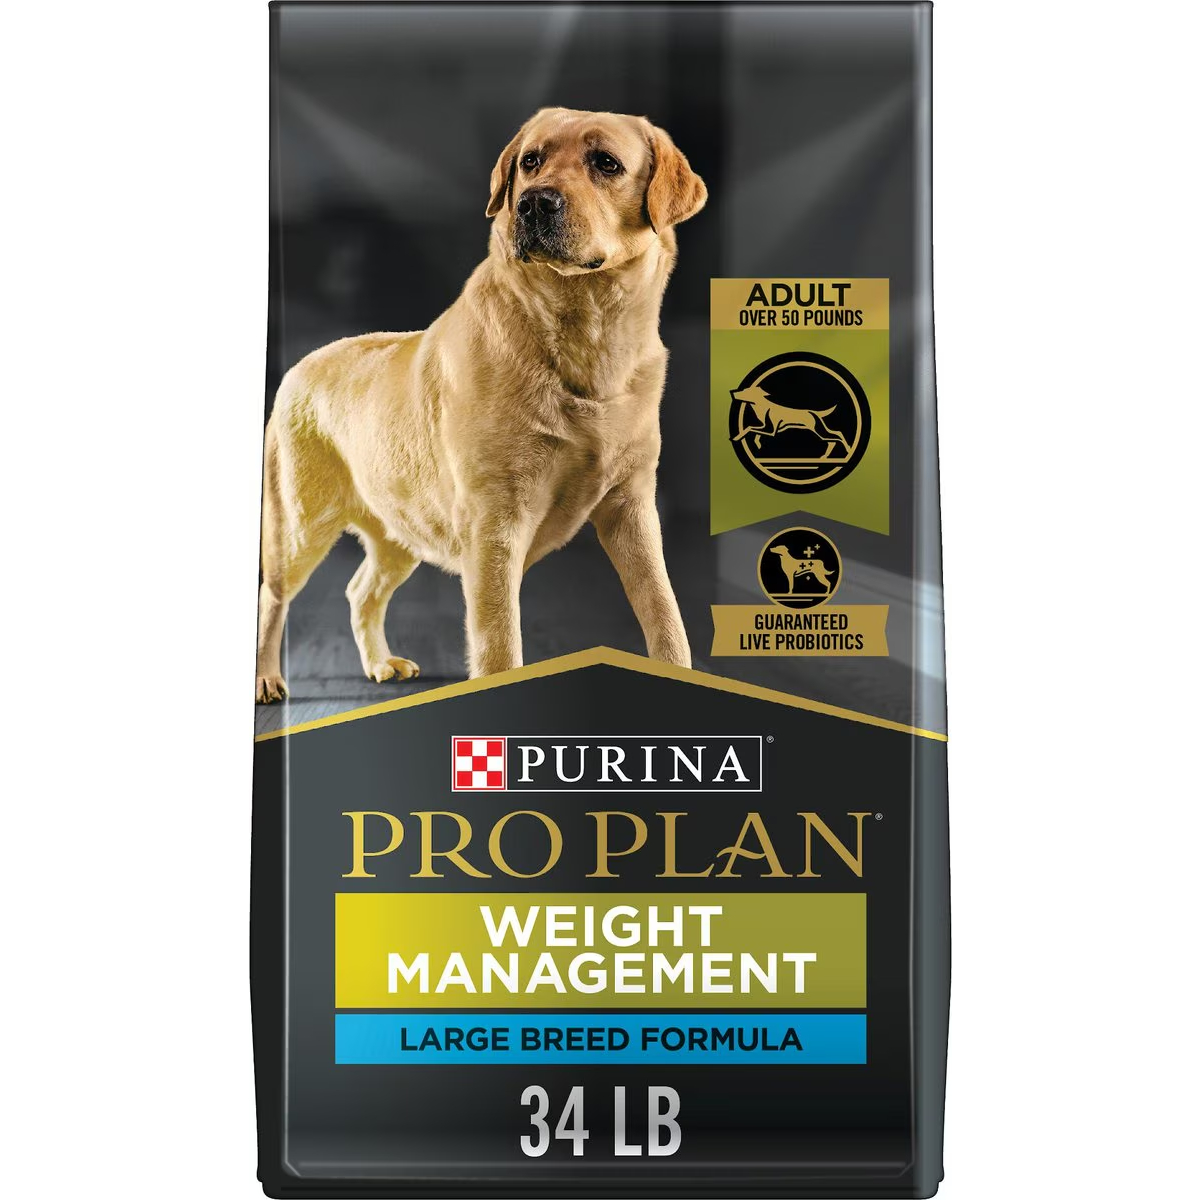 Purina Pro Plan Adult Large Breed Weight Management Chicken & Rice Formula Dry Dog Food 